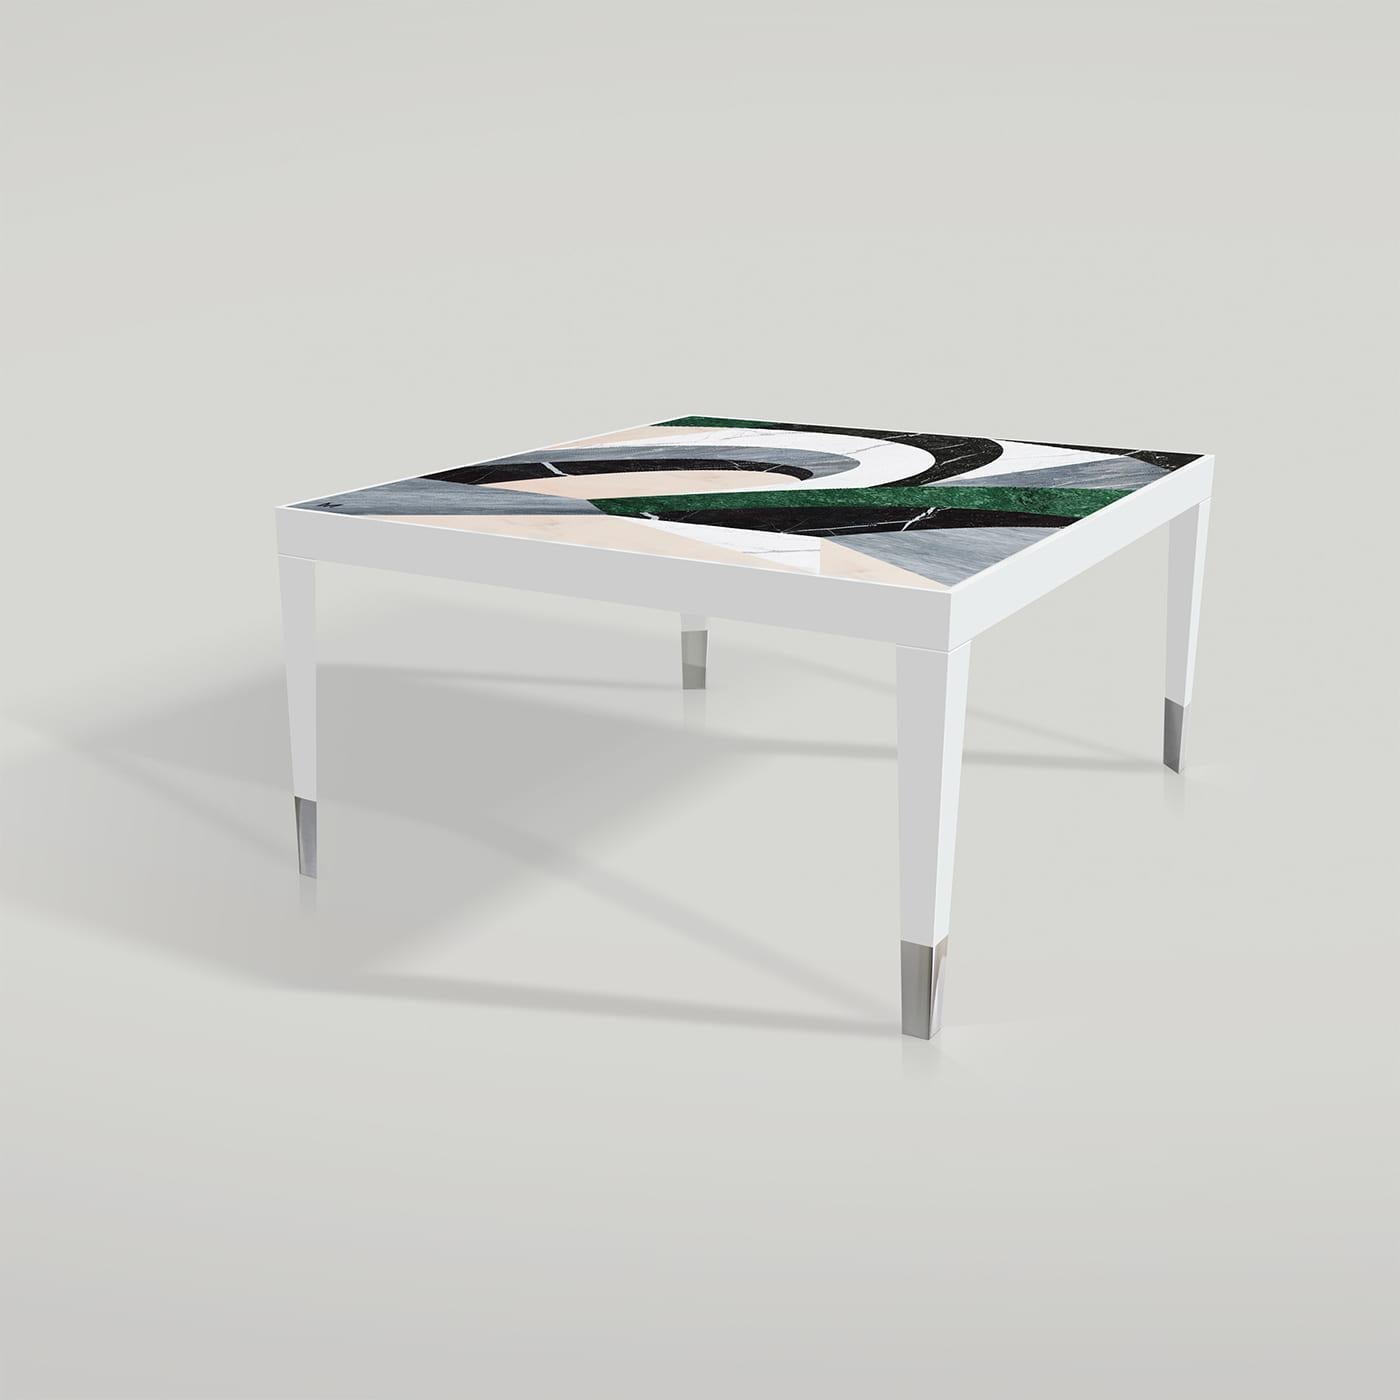 An evocative tribute to Turin's historic boulevard's arched porticoes, this stunning Via Roma large coffee table boasts a glossy white wood frame with exquisite marble inlays creating impressive chromatic contrasts in its abstract pattern.